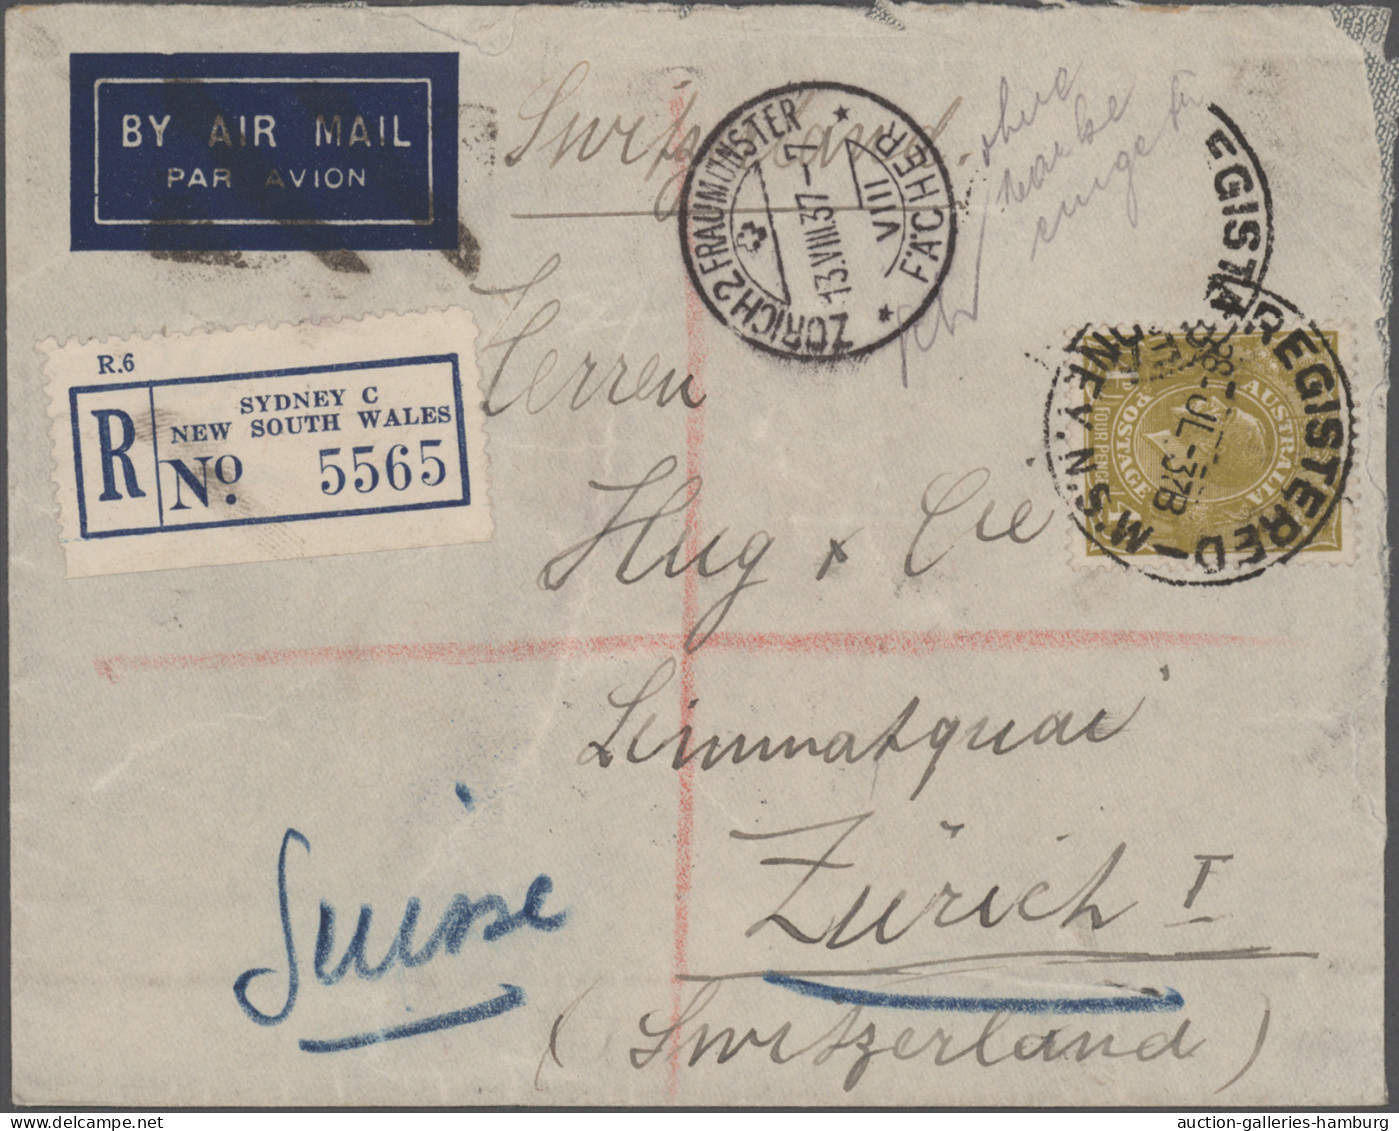 Desaster Mail: 1936/1955 (ca.), Australia, lot of ten covers which were damaged